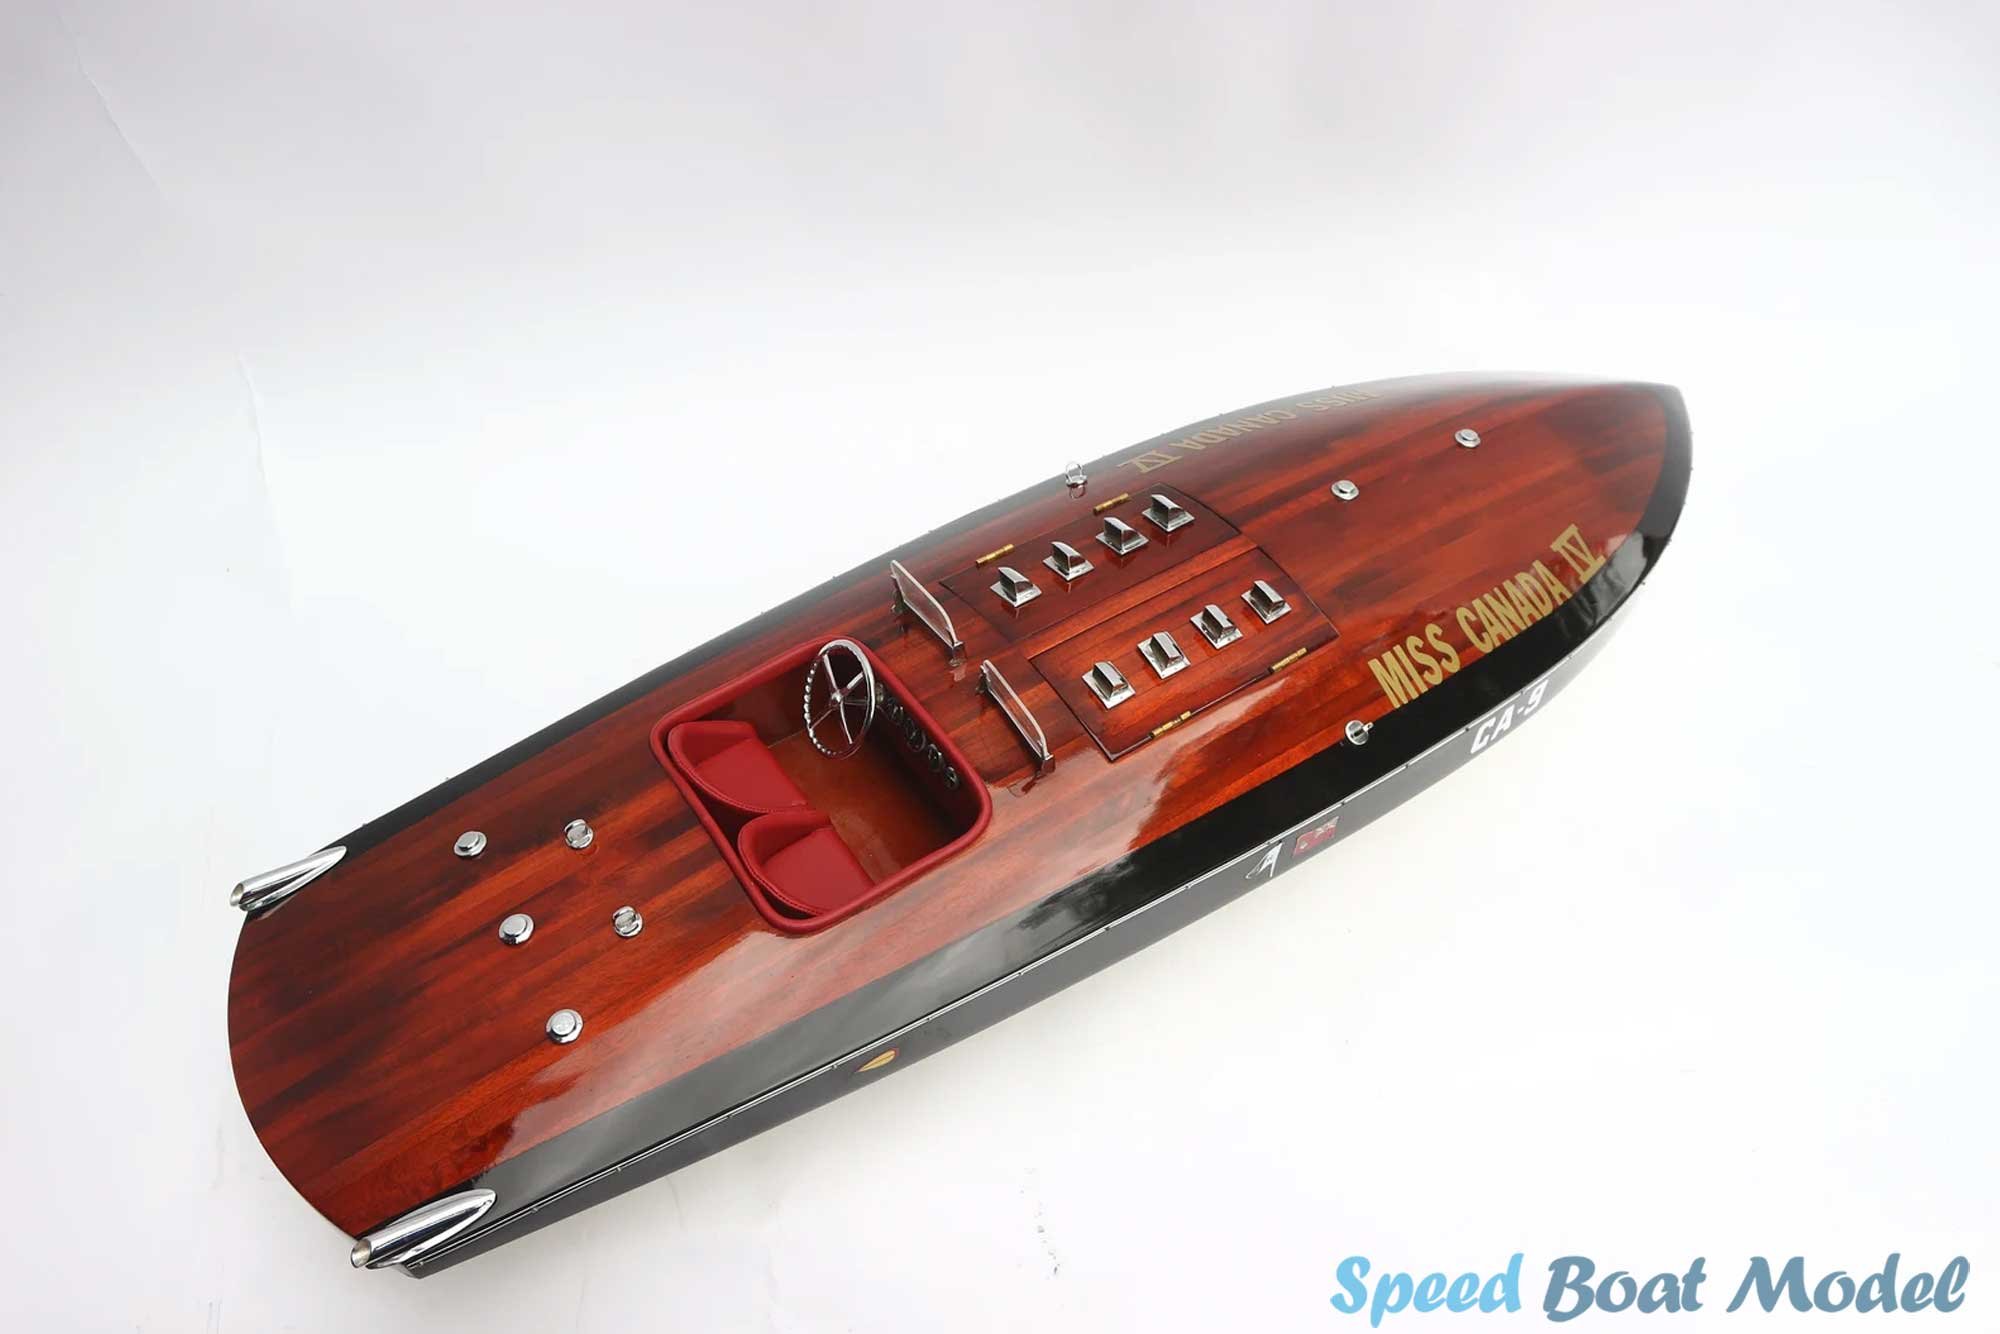 Miss Canada IV CA 9 Speed Boat Model 34 Inches